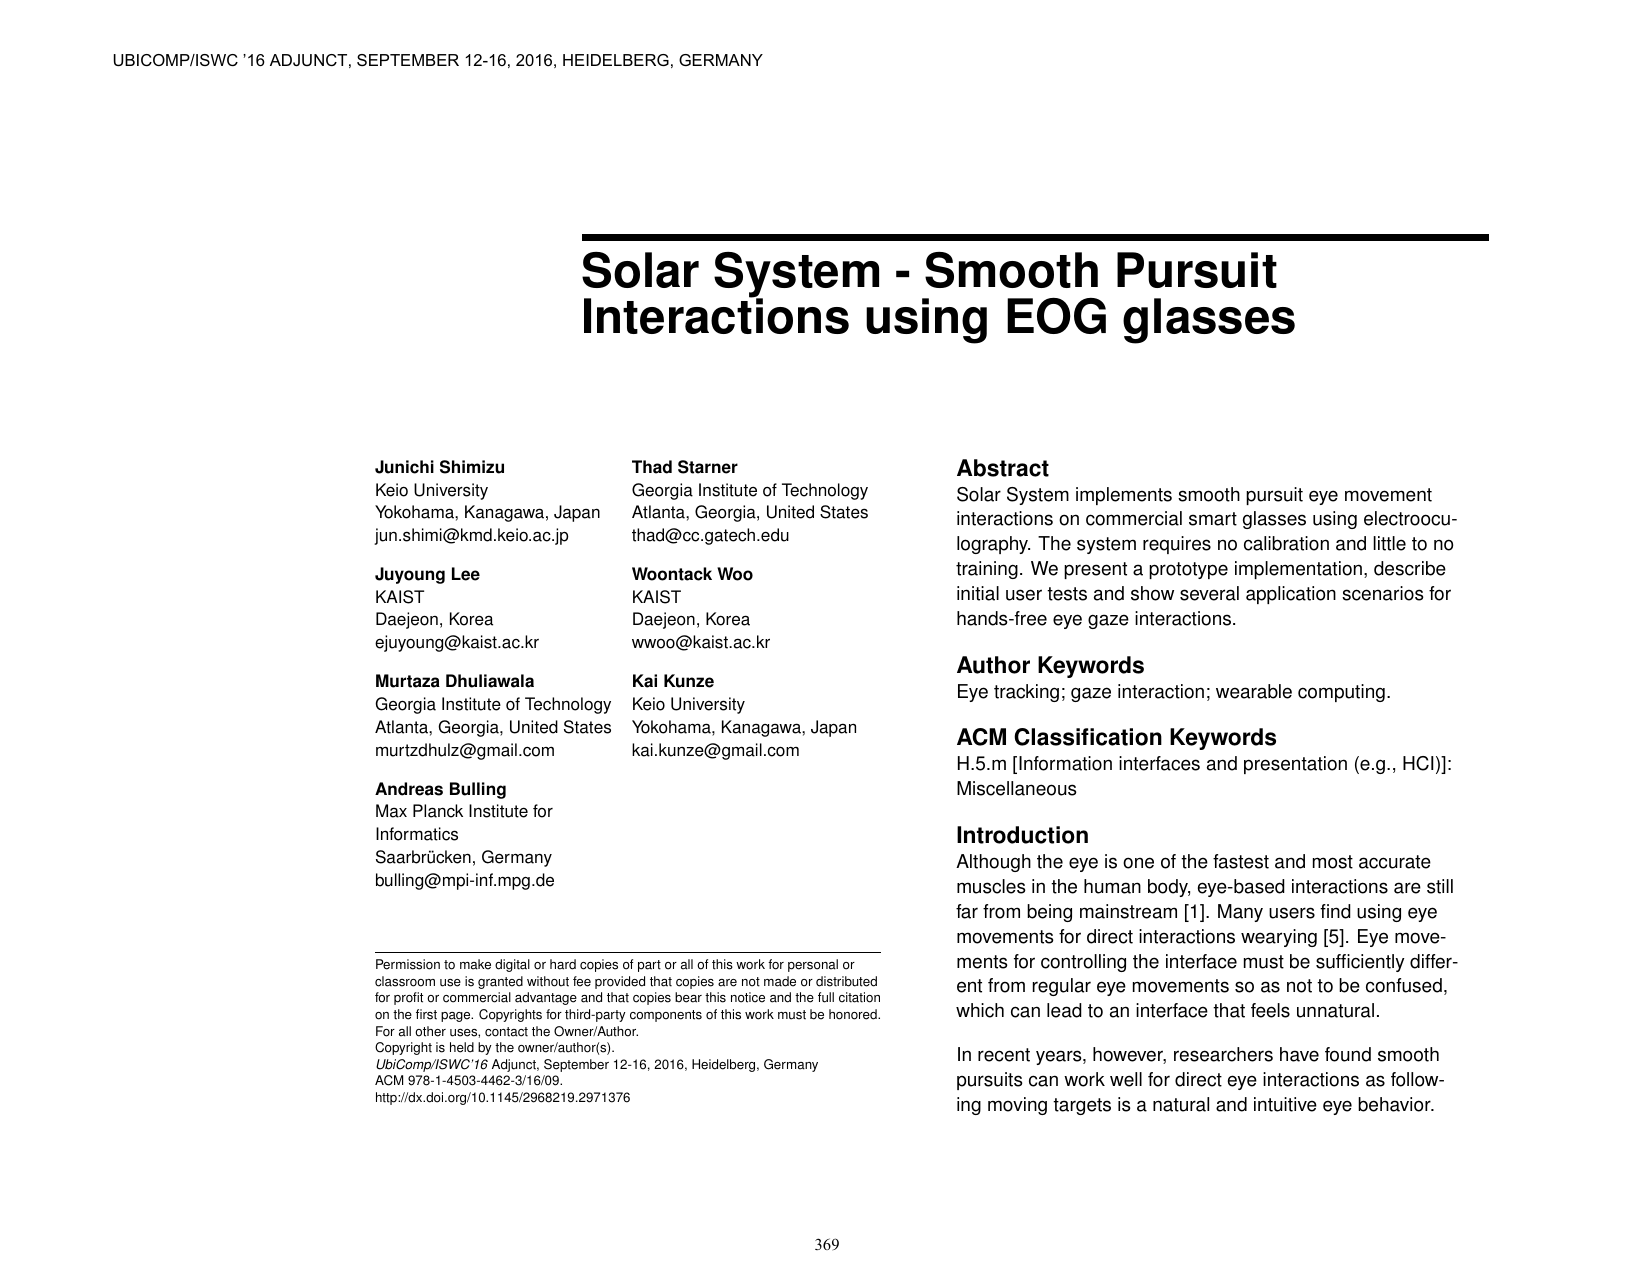 Solar System: Smooth Pursuit Interactions Using EOG Glasses